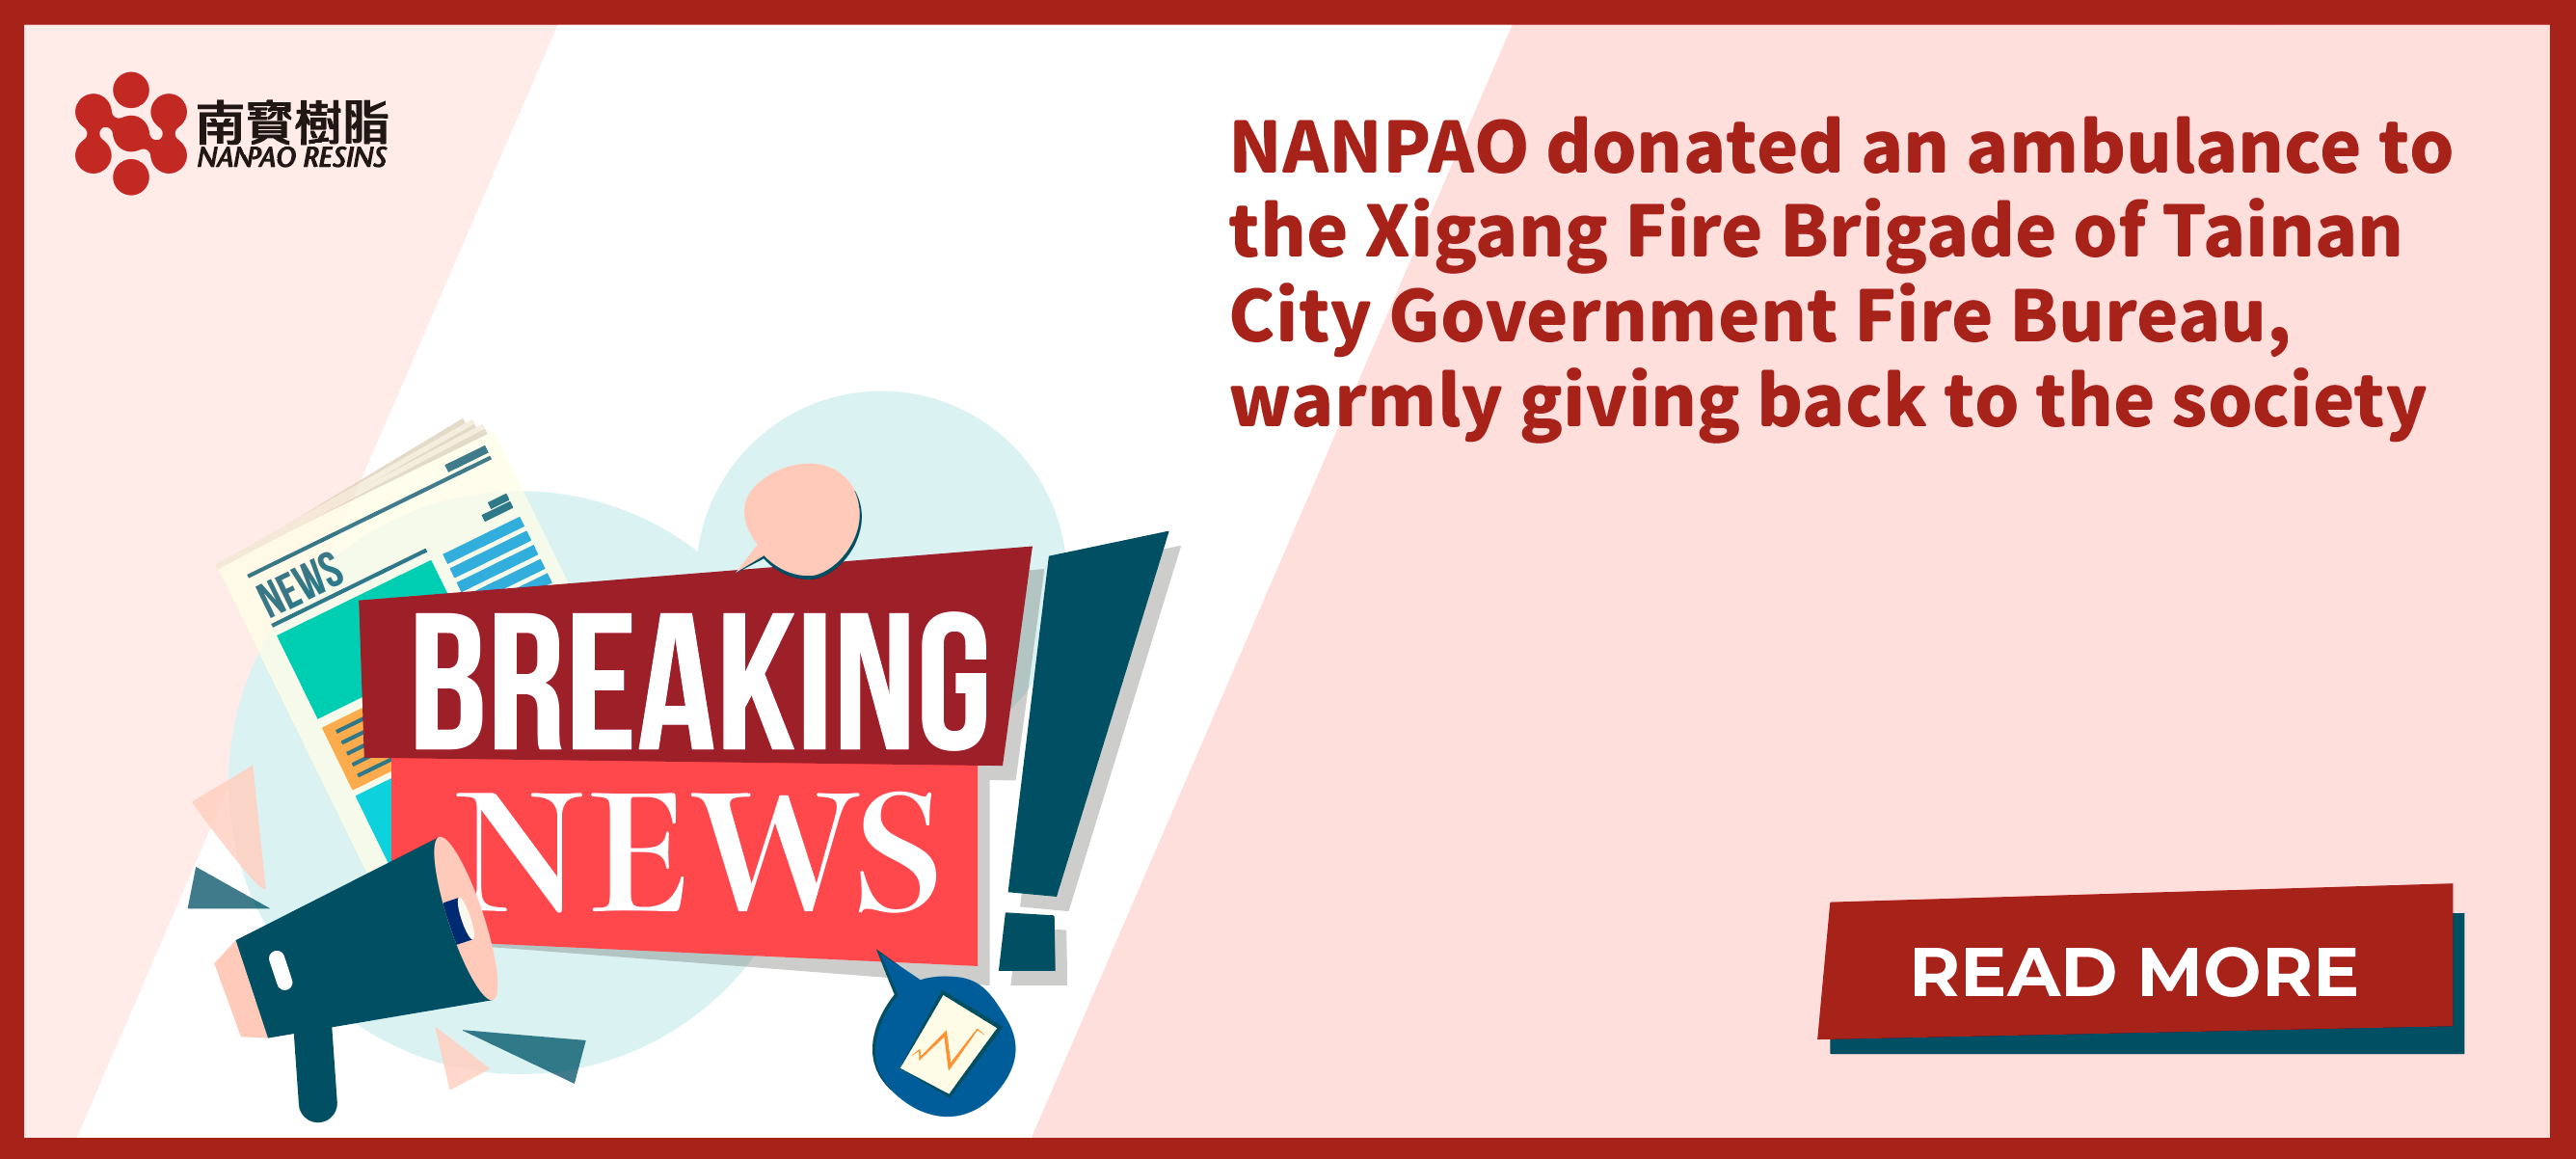 NANPAO donated an ambulance to the Xigang Fire Brigade of Tainan City Government Fire Bureau, warmly giving back to the society